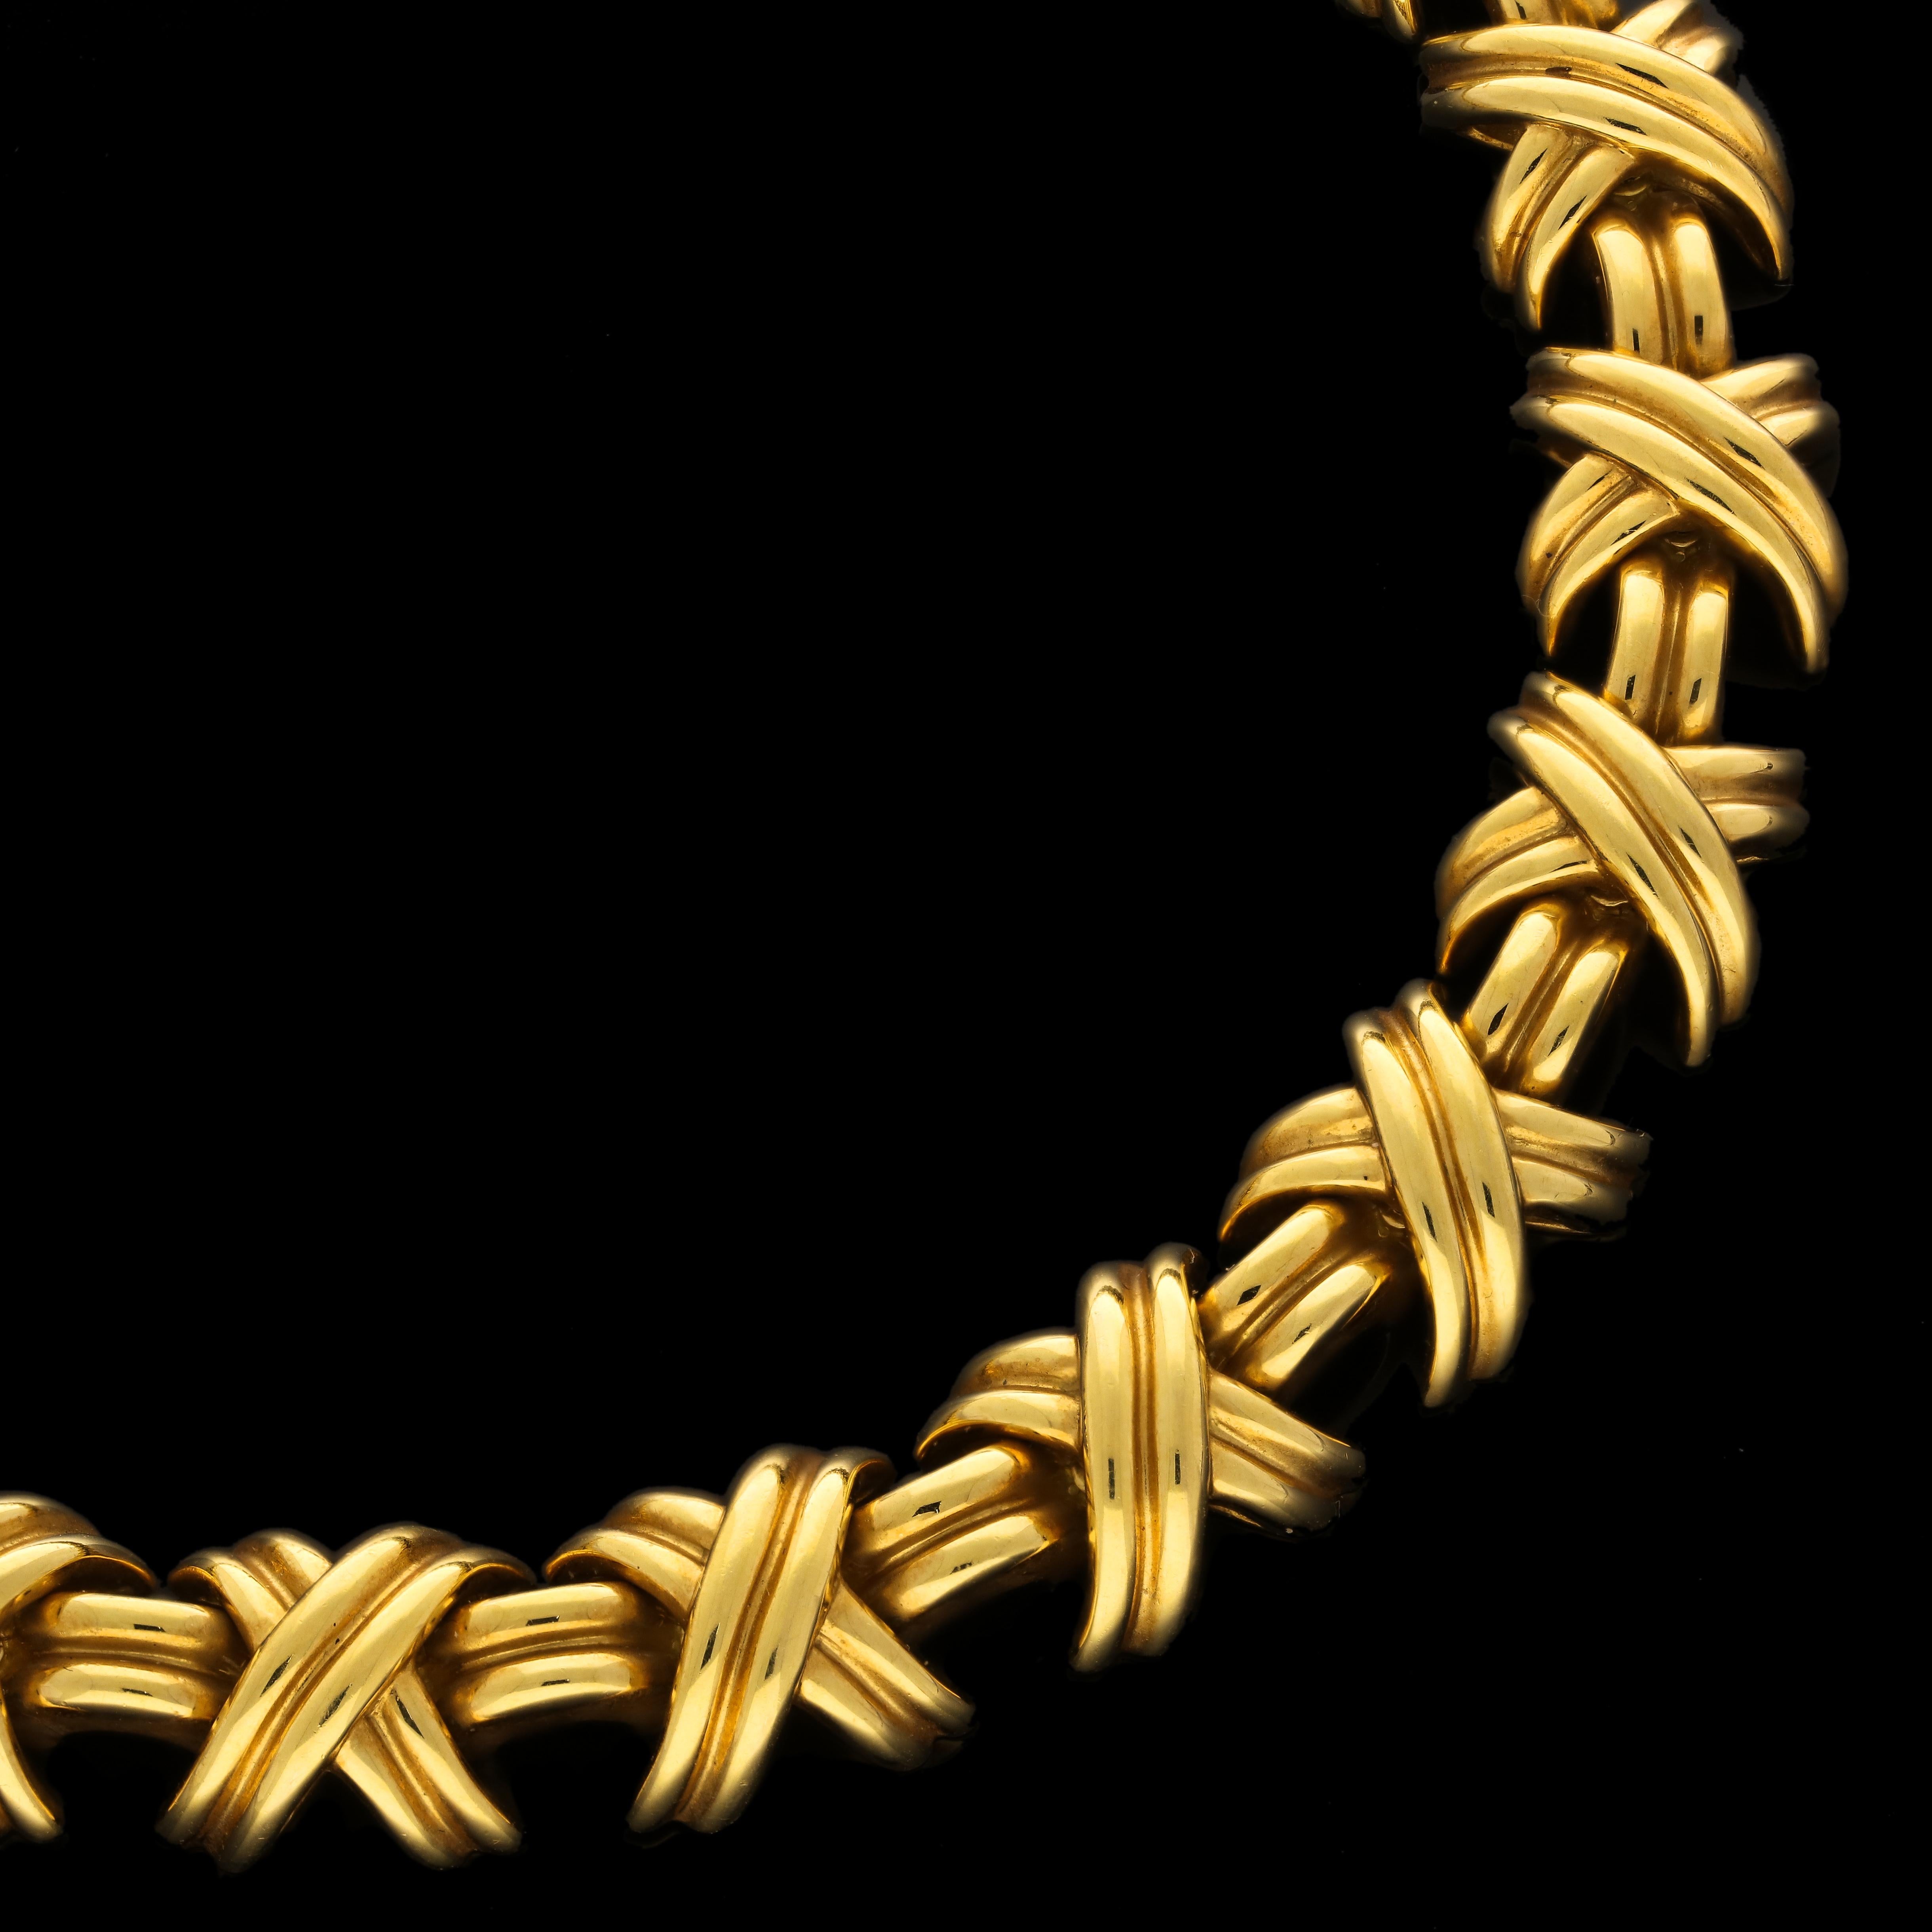 A classic 18ct gold 'Signature' necklace by Tiffany & Co. circa 2000s formed of 31 uniform domed X-shaped motifs in ribbed yellow gold joined by double row arched links, all to a concealed tongue and box clasp. The Tiffany ‘Signature’ collection